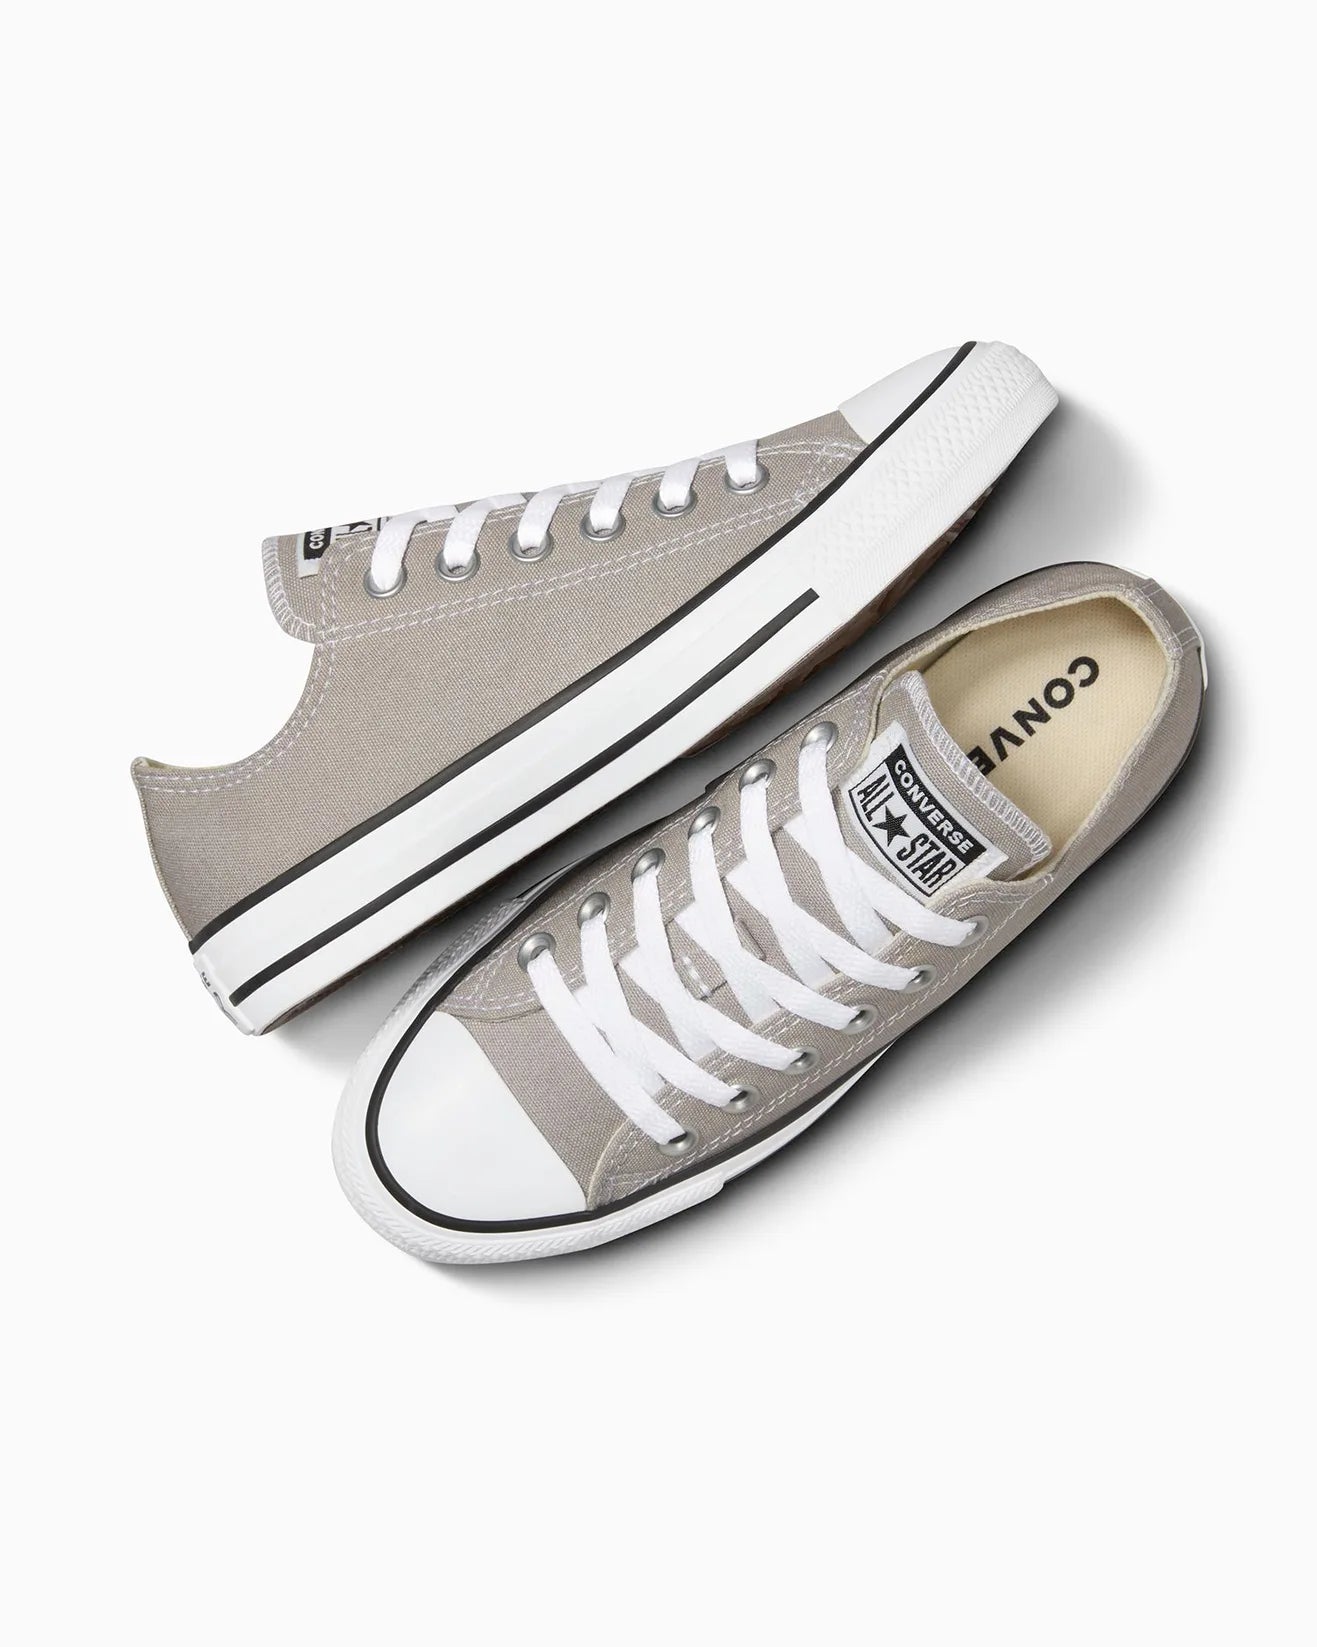 - Chuck Taylor All Star Canvas Totally Natural Grey Colour - (A06565) - TOT - R1L8